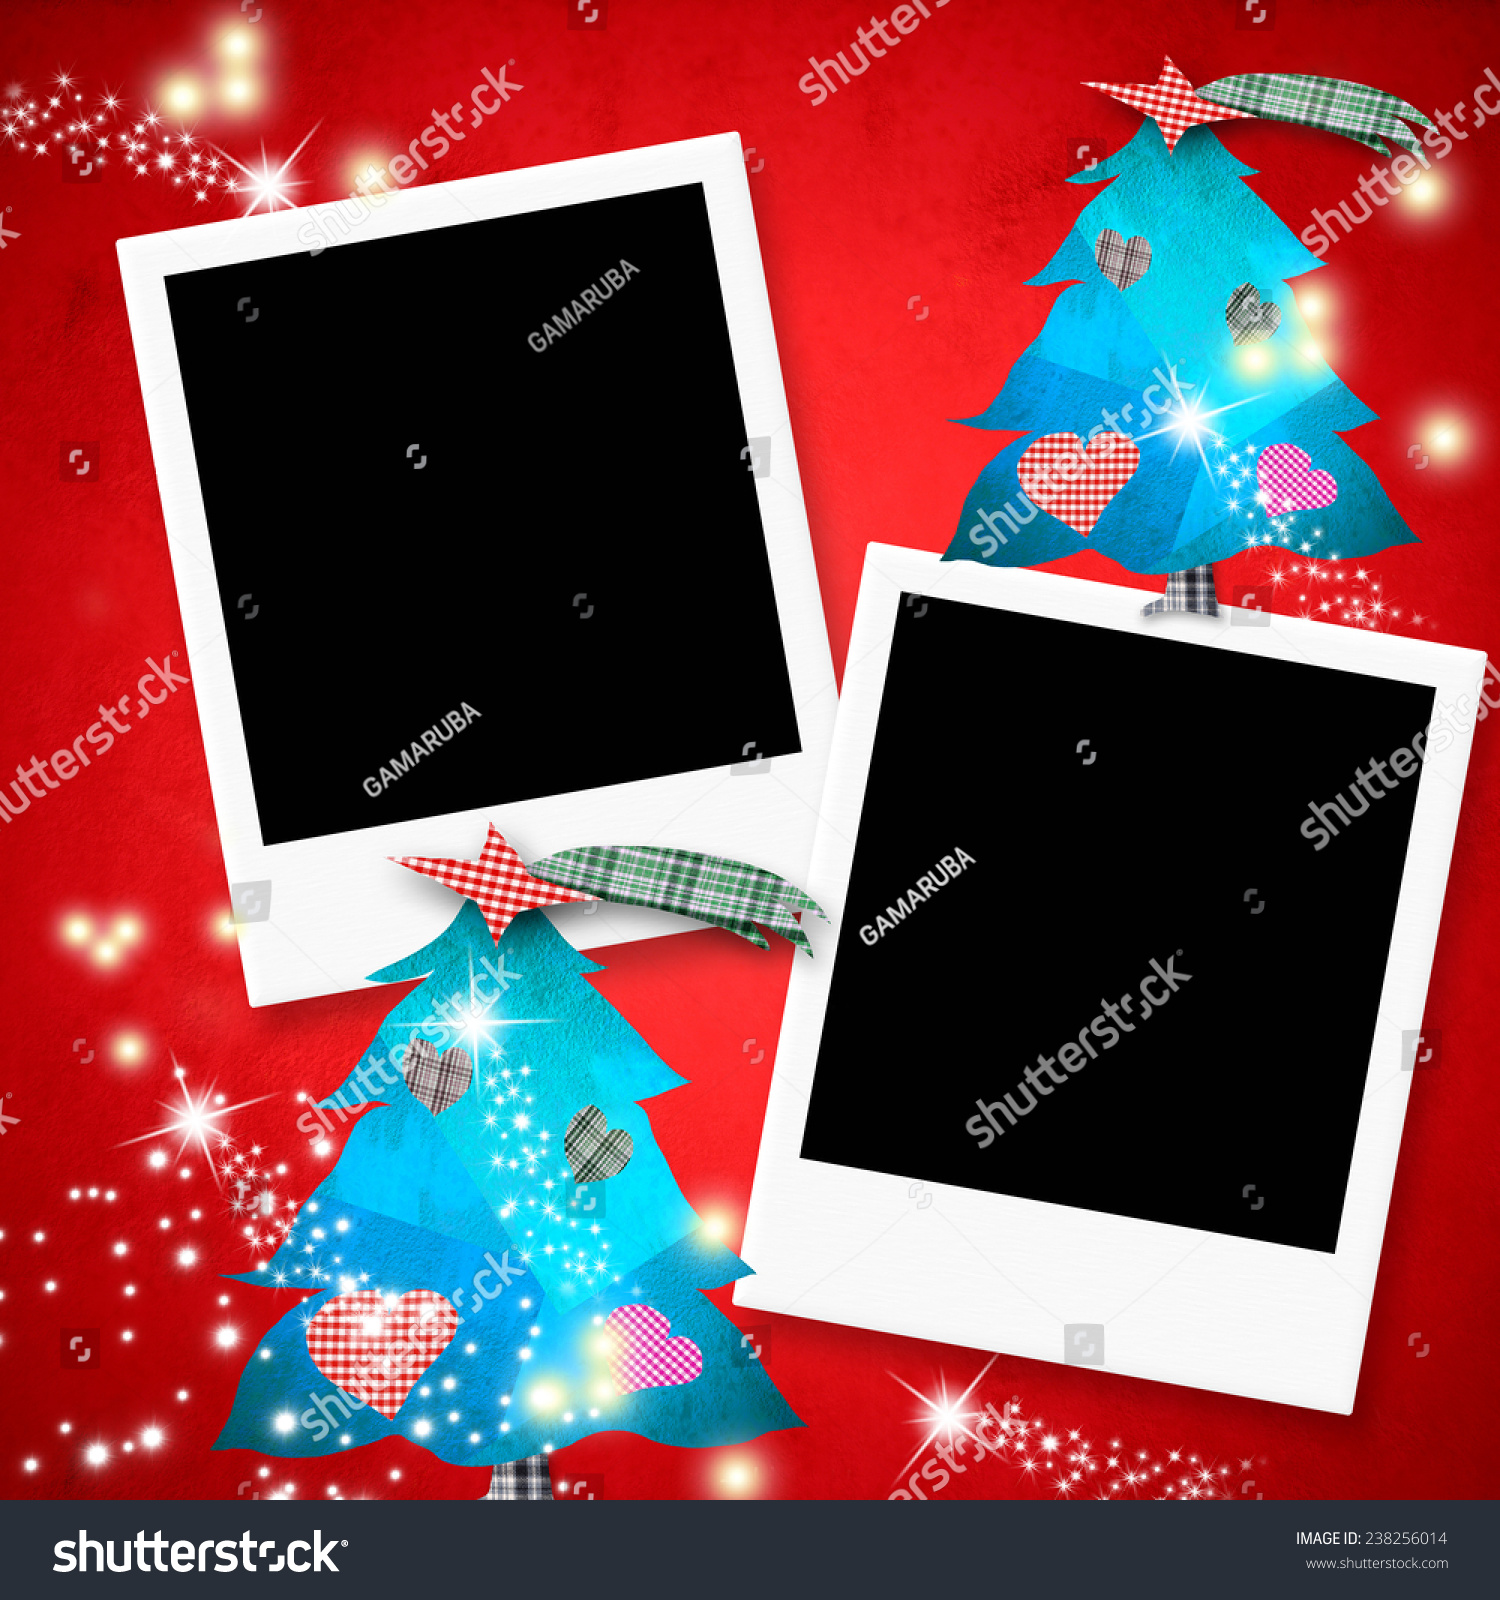 Christmas Cards Photo Frames Two Instant Stock 